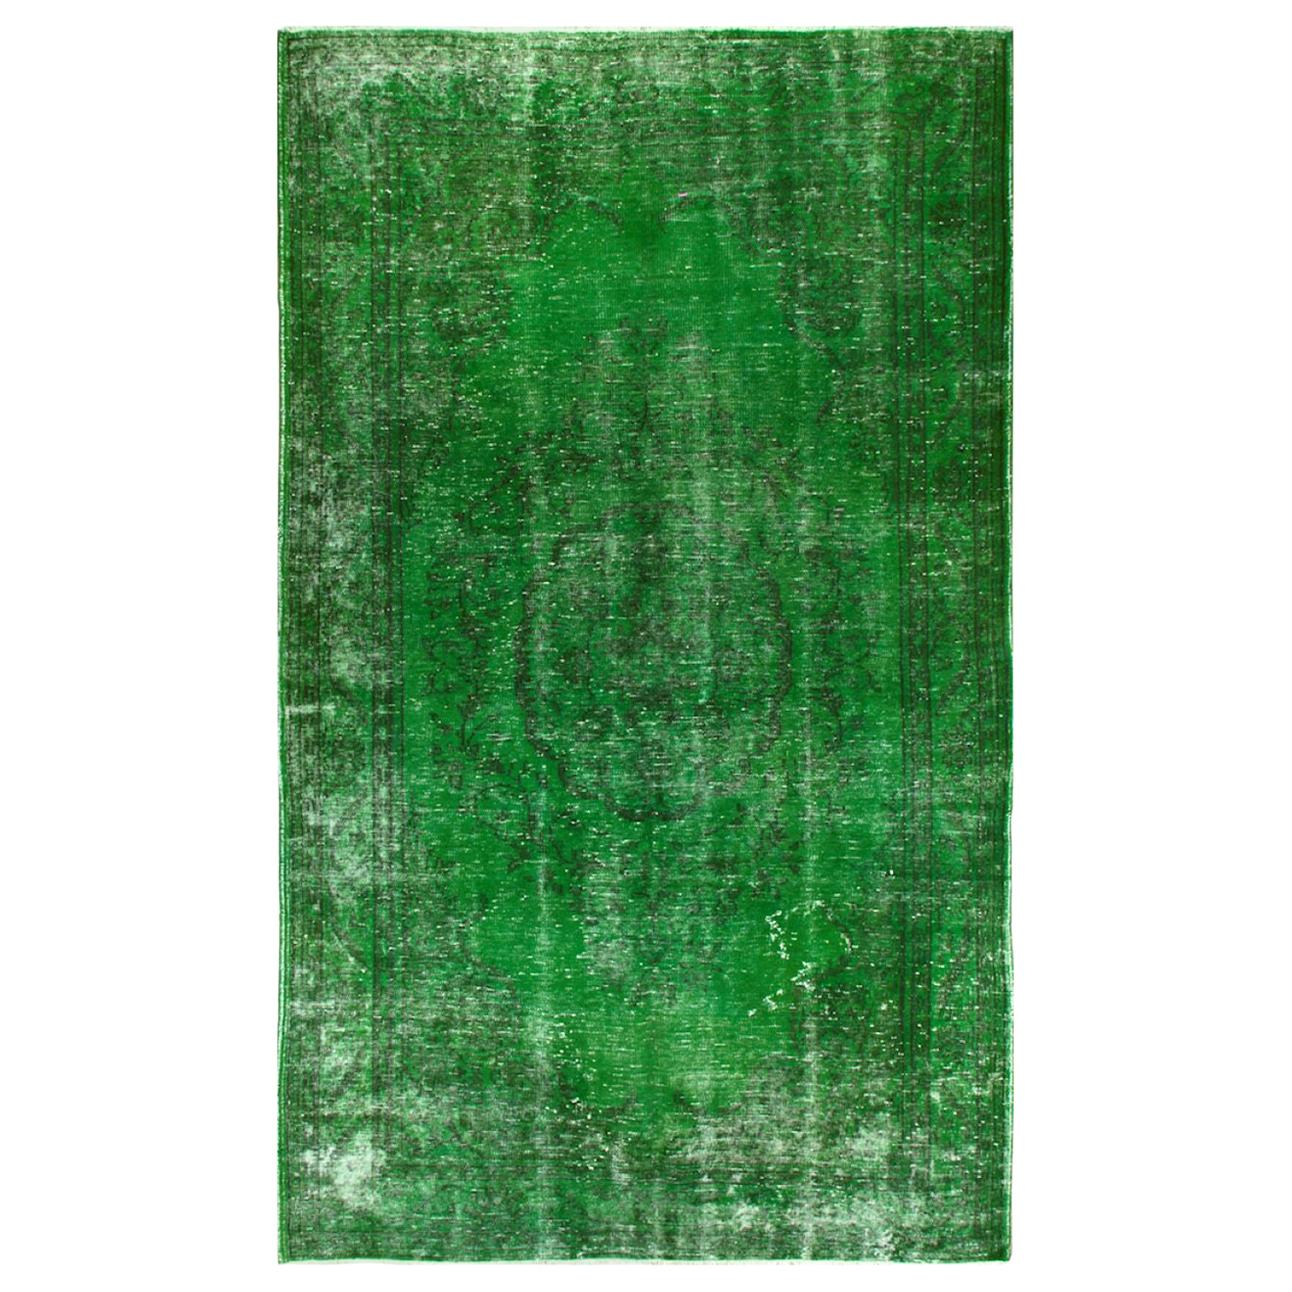 Distressed Vintage Rug Redyed in Green Color. Great with Contemporary Furniture